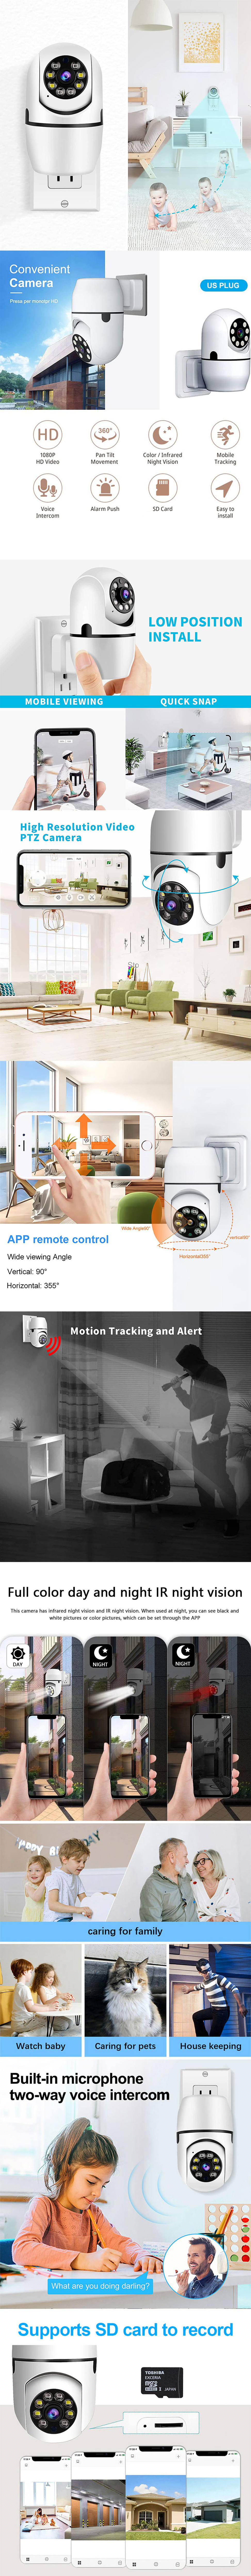 A11 1080P HD Security Camera Wireless Plug-In PTZ Monitoring Surveillance Cam IR Night Vision Mobile Tracking Voice Intercom WiFi Remote Alarm Push Support SD Card Home IP Monitor Camera